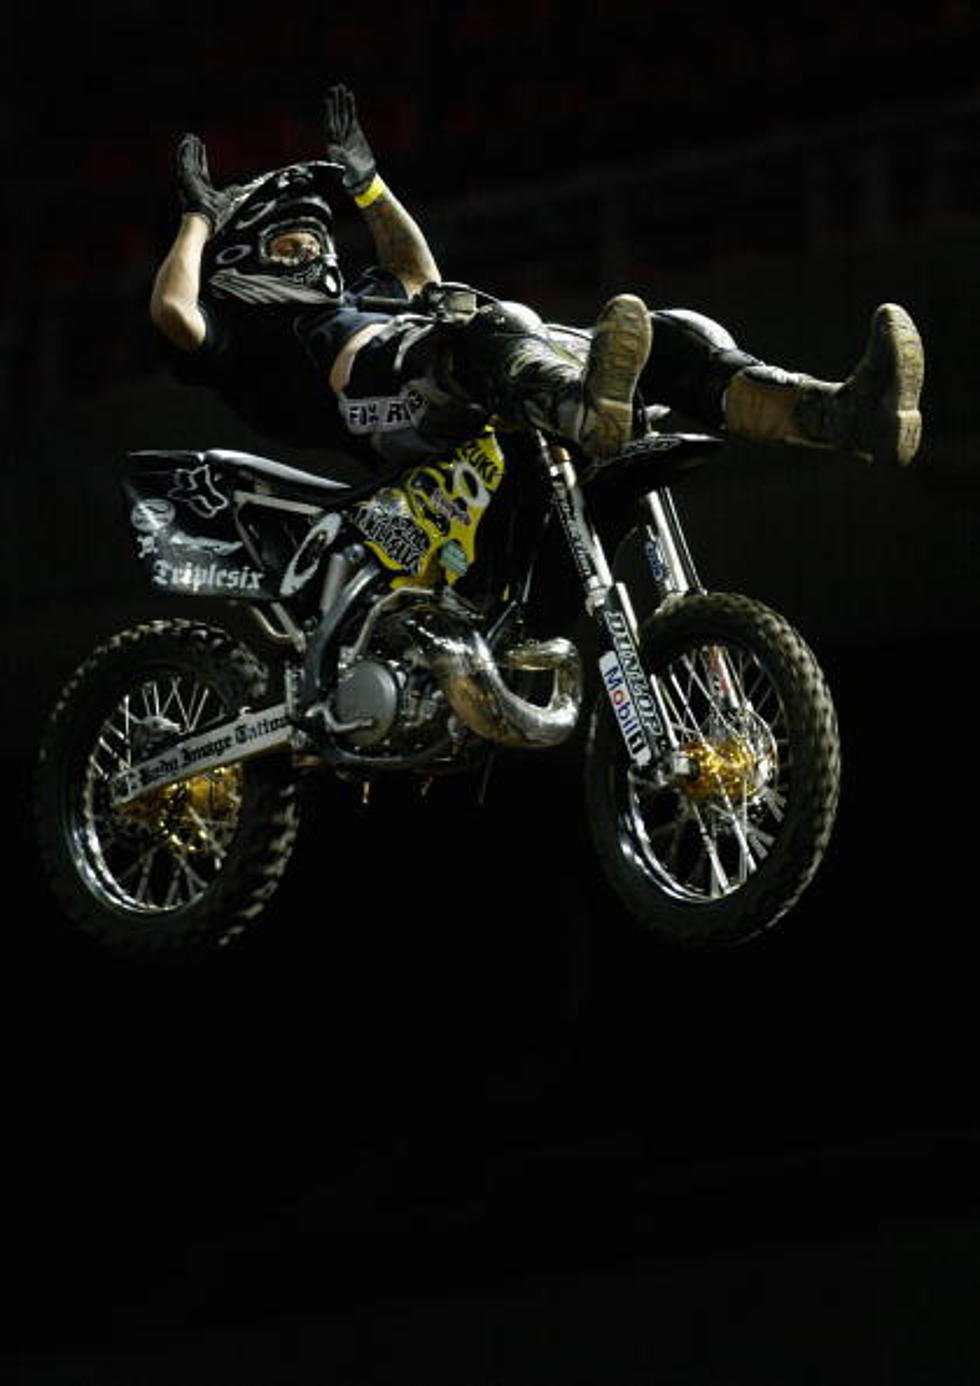 Next Week, The Hawk will be “Flying High Again” with MontanaFair Supercross Tickets